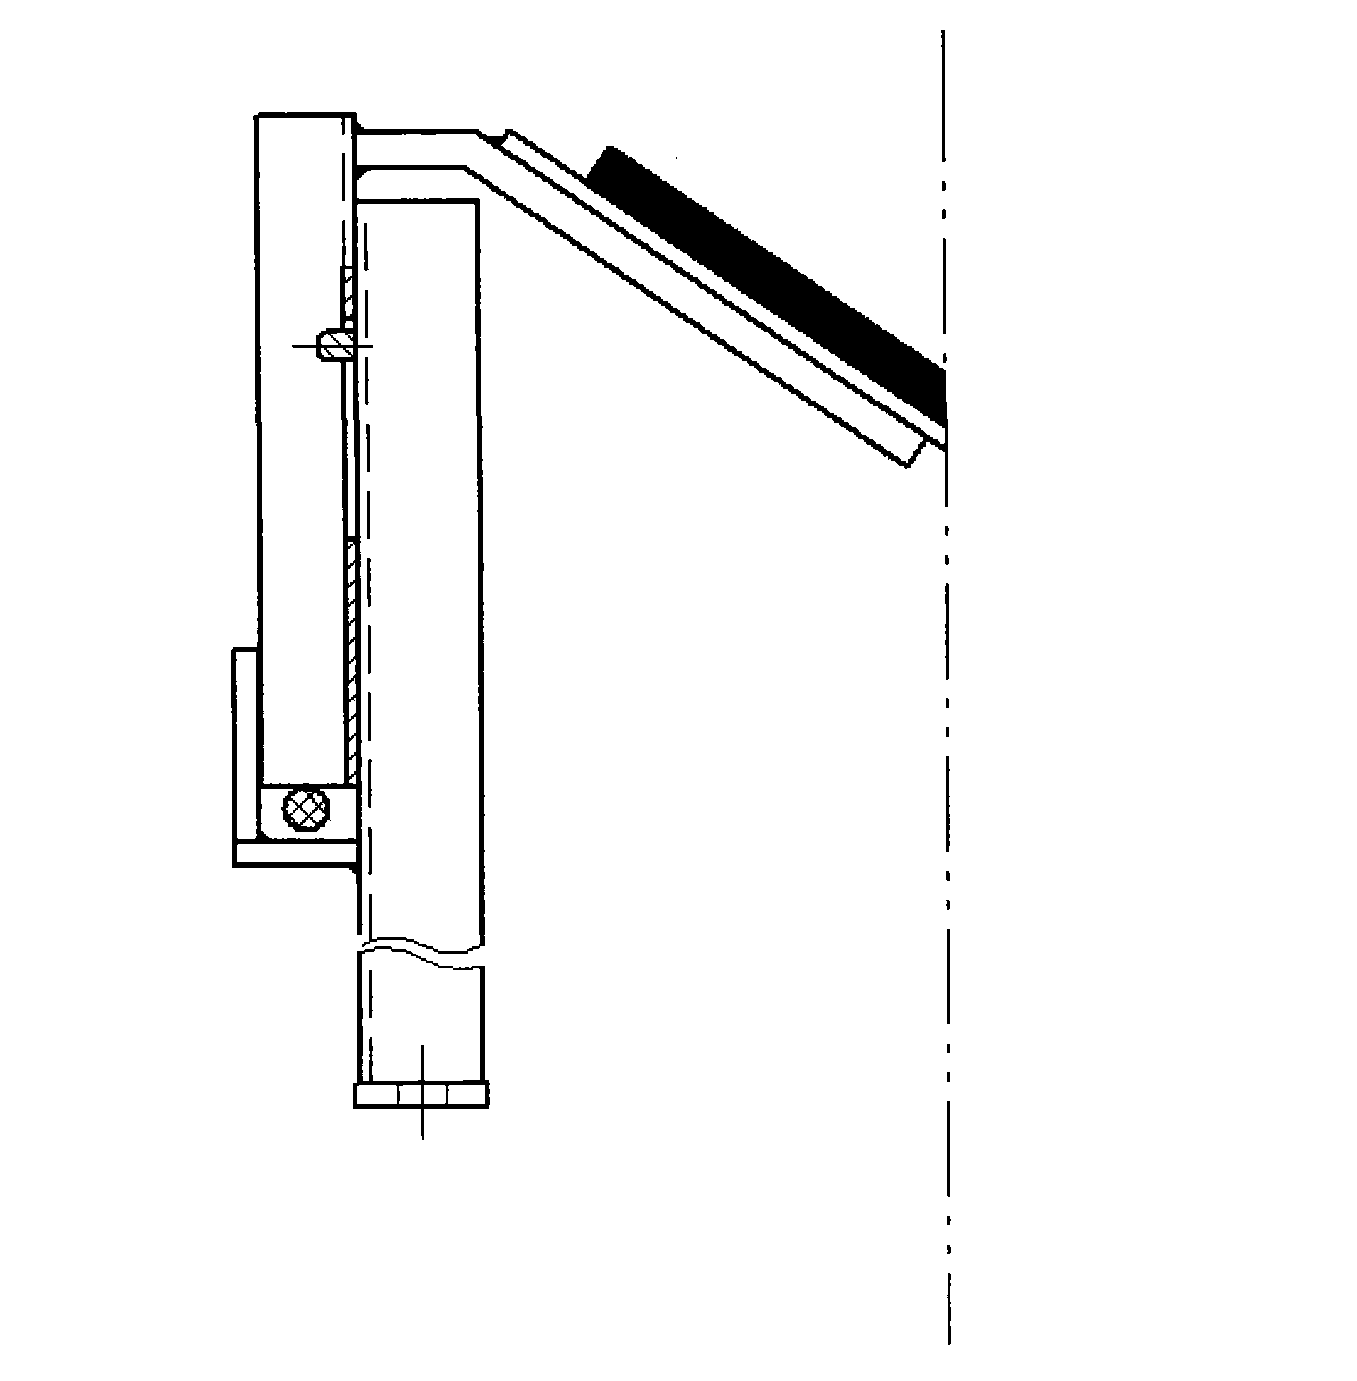 Damping device with controllable hydraulic pressure